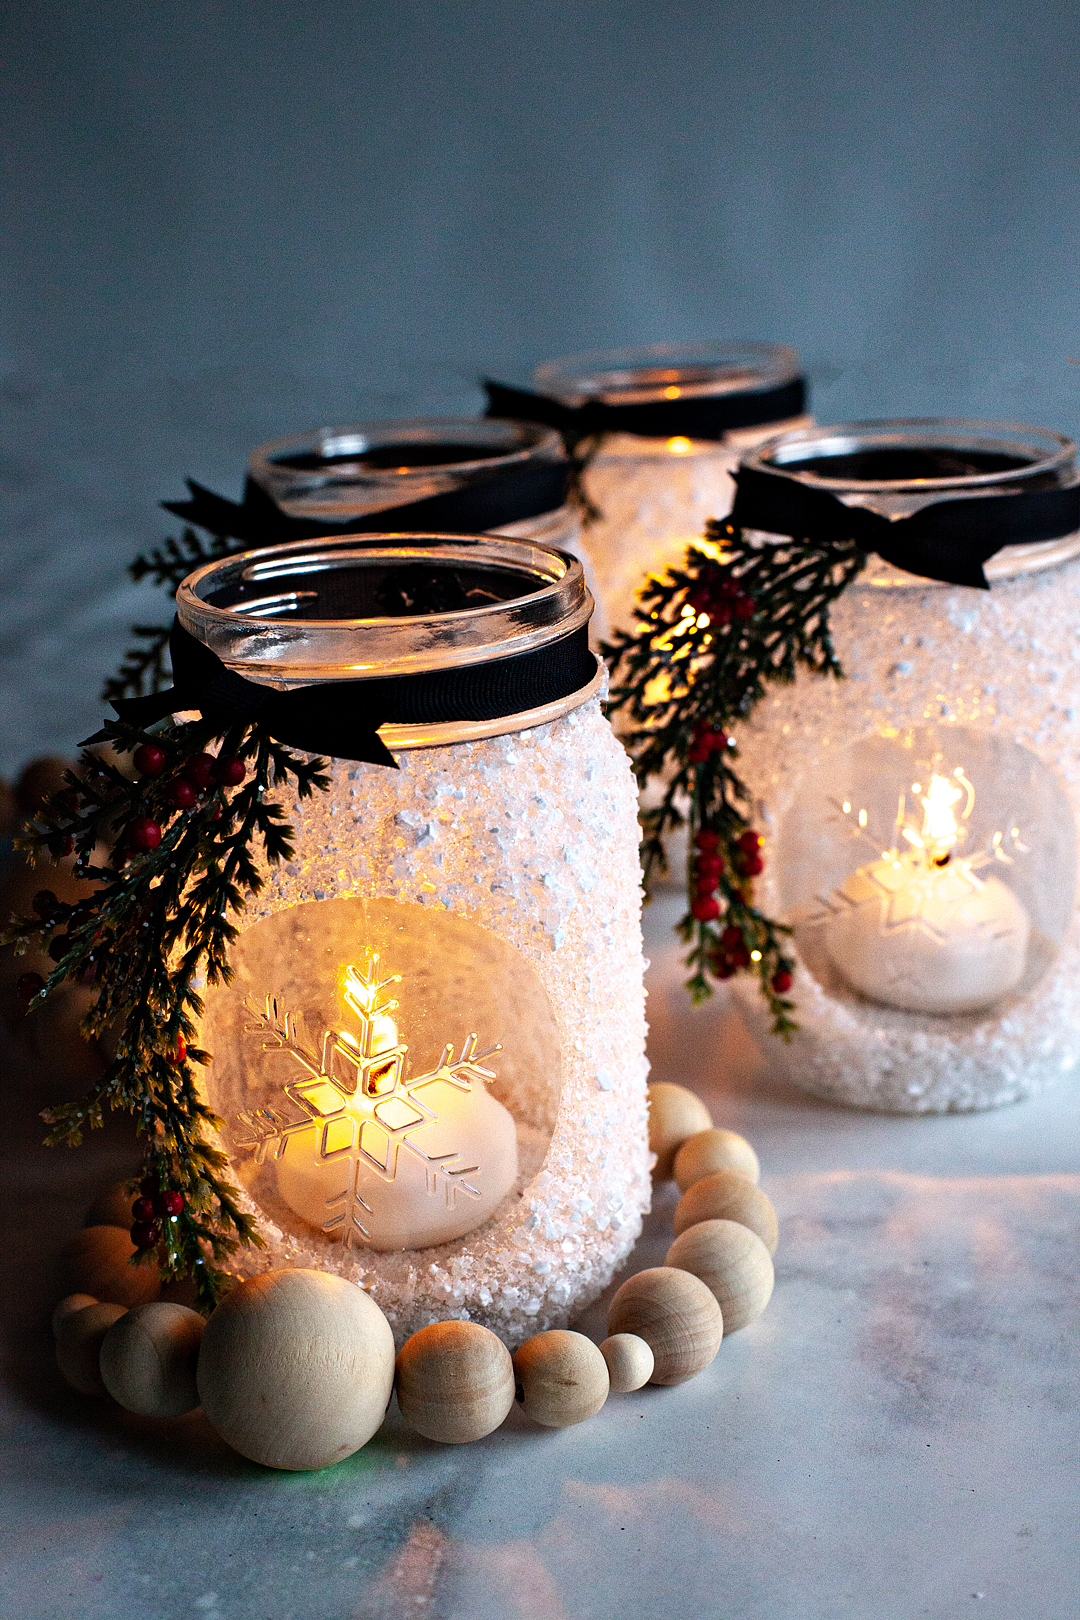 I’m thrilled that this season’s Ball® Keepsake Collectible Holiday Jar is an ode to the stunning snowflake! I decided that a fun way to use this fun collectible jar is to make snowflake lanterns that are perfect for dressing up your home for the winter season or, as a fabulous holiday gift.